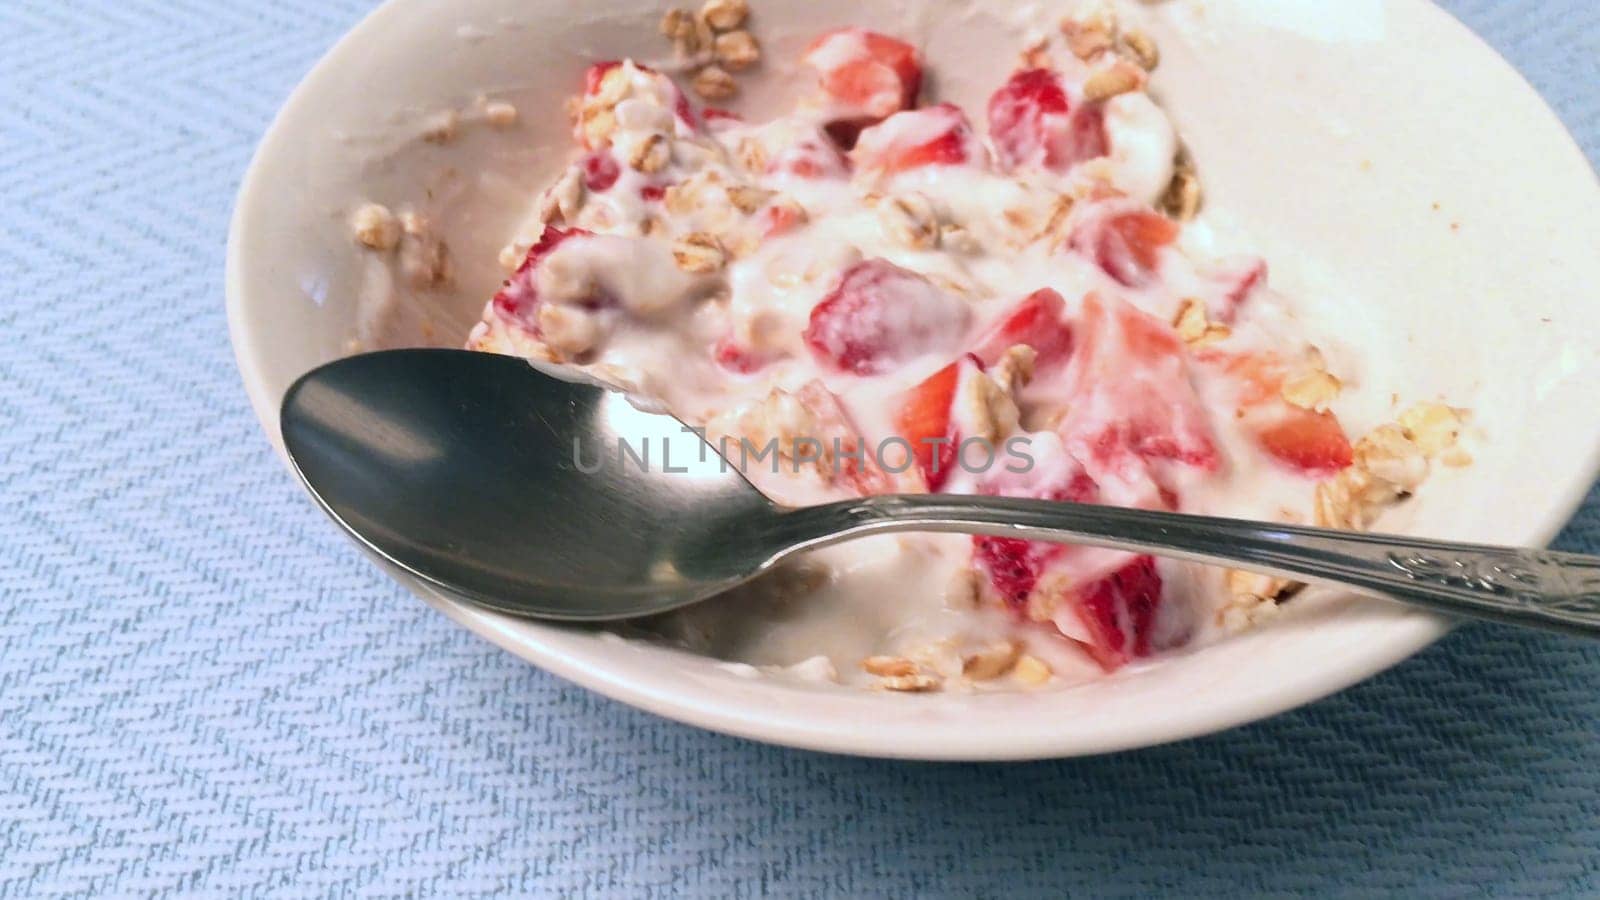 Yogurt with cereal and strawberries by homydesign